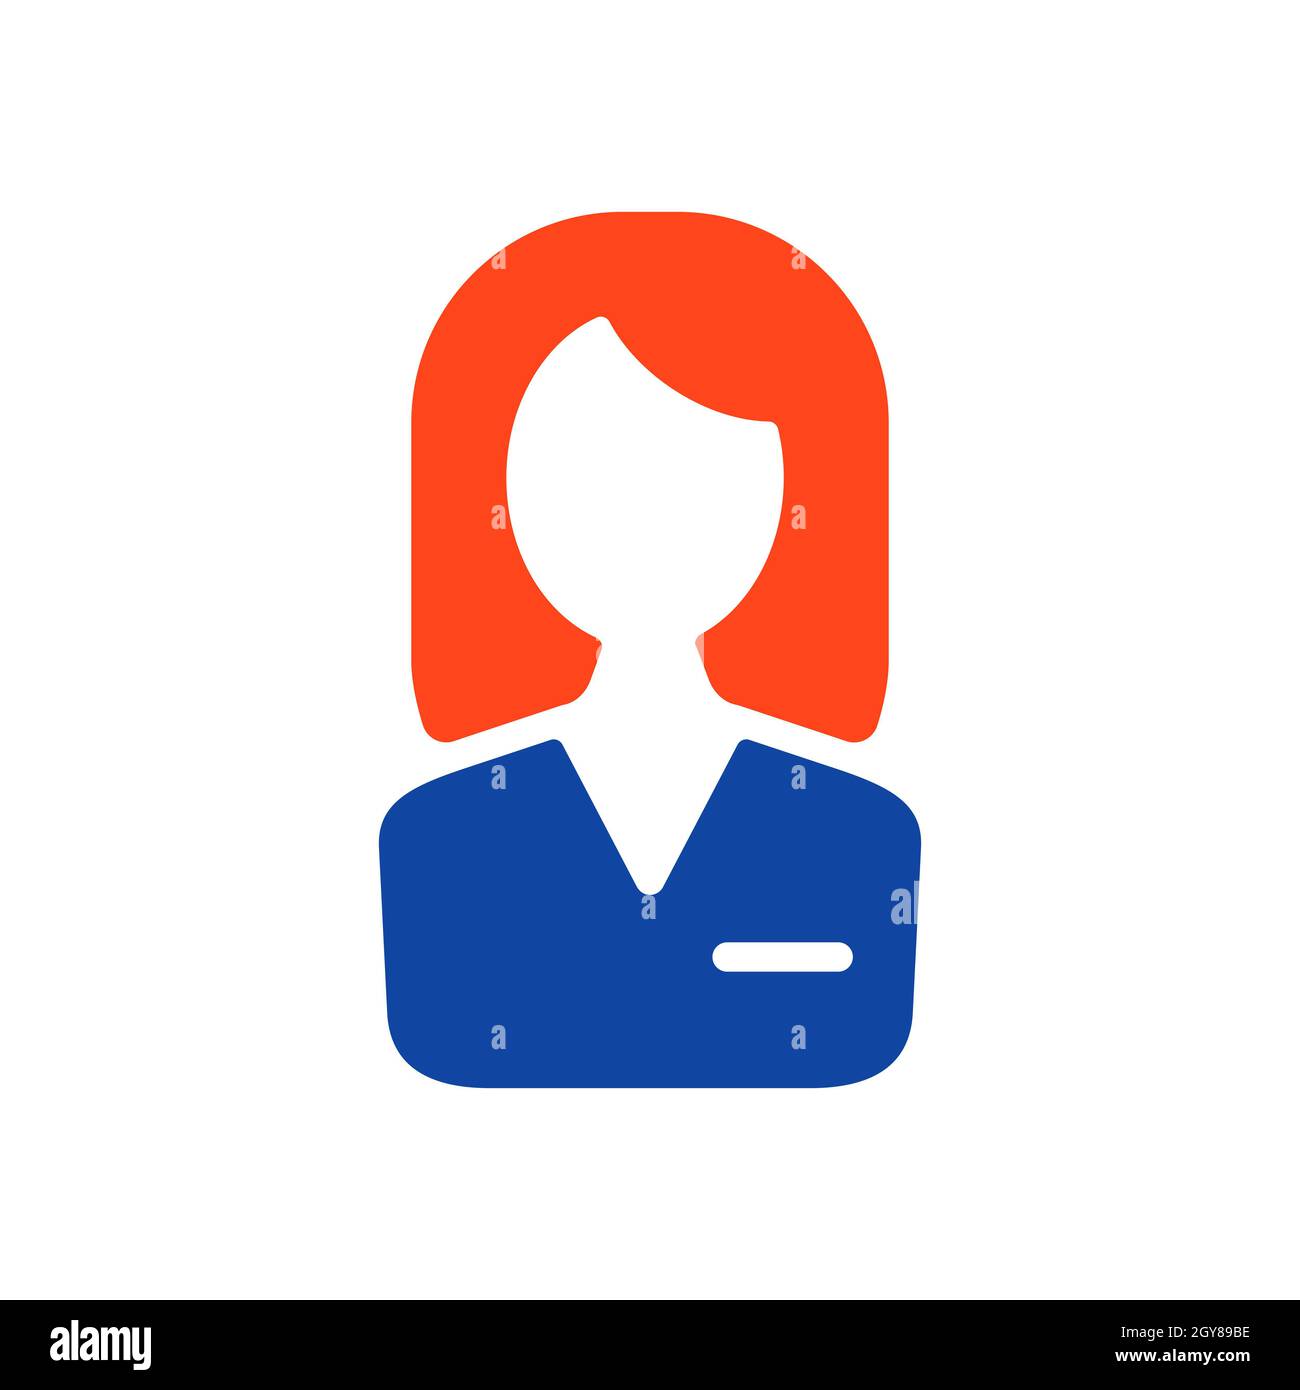 Flat business woman user profile avatar icon Vector Image